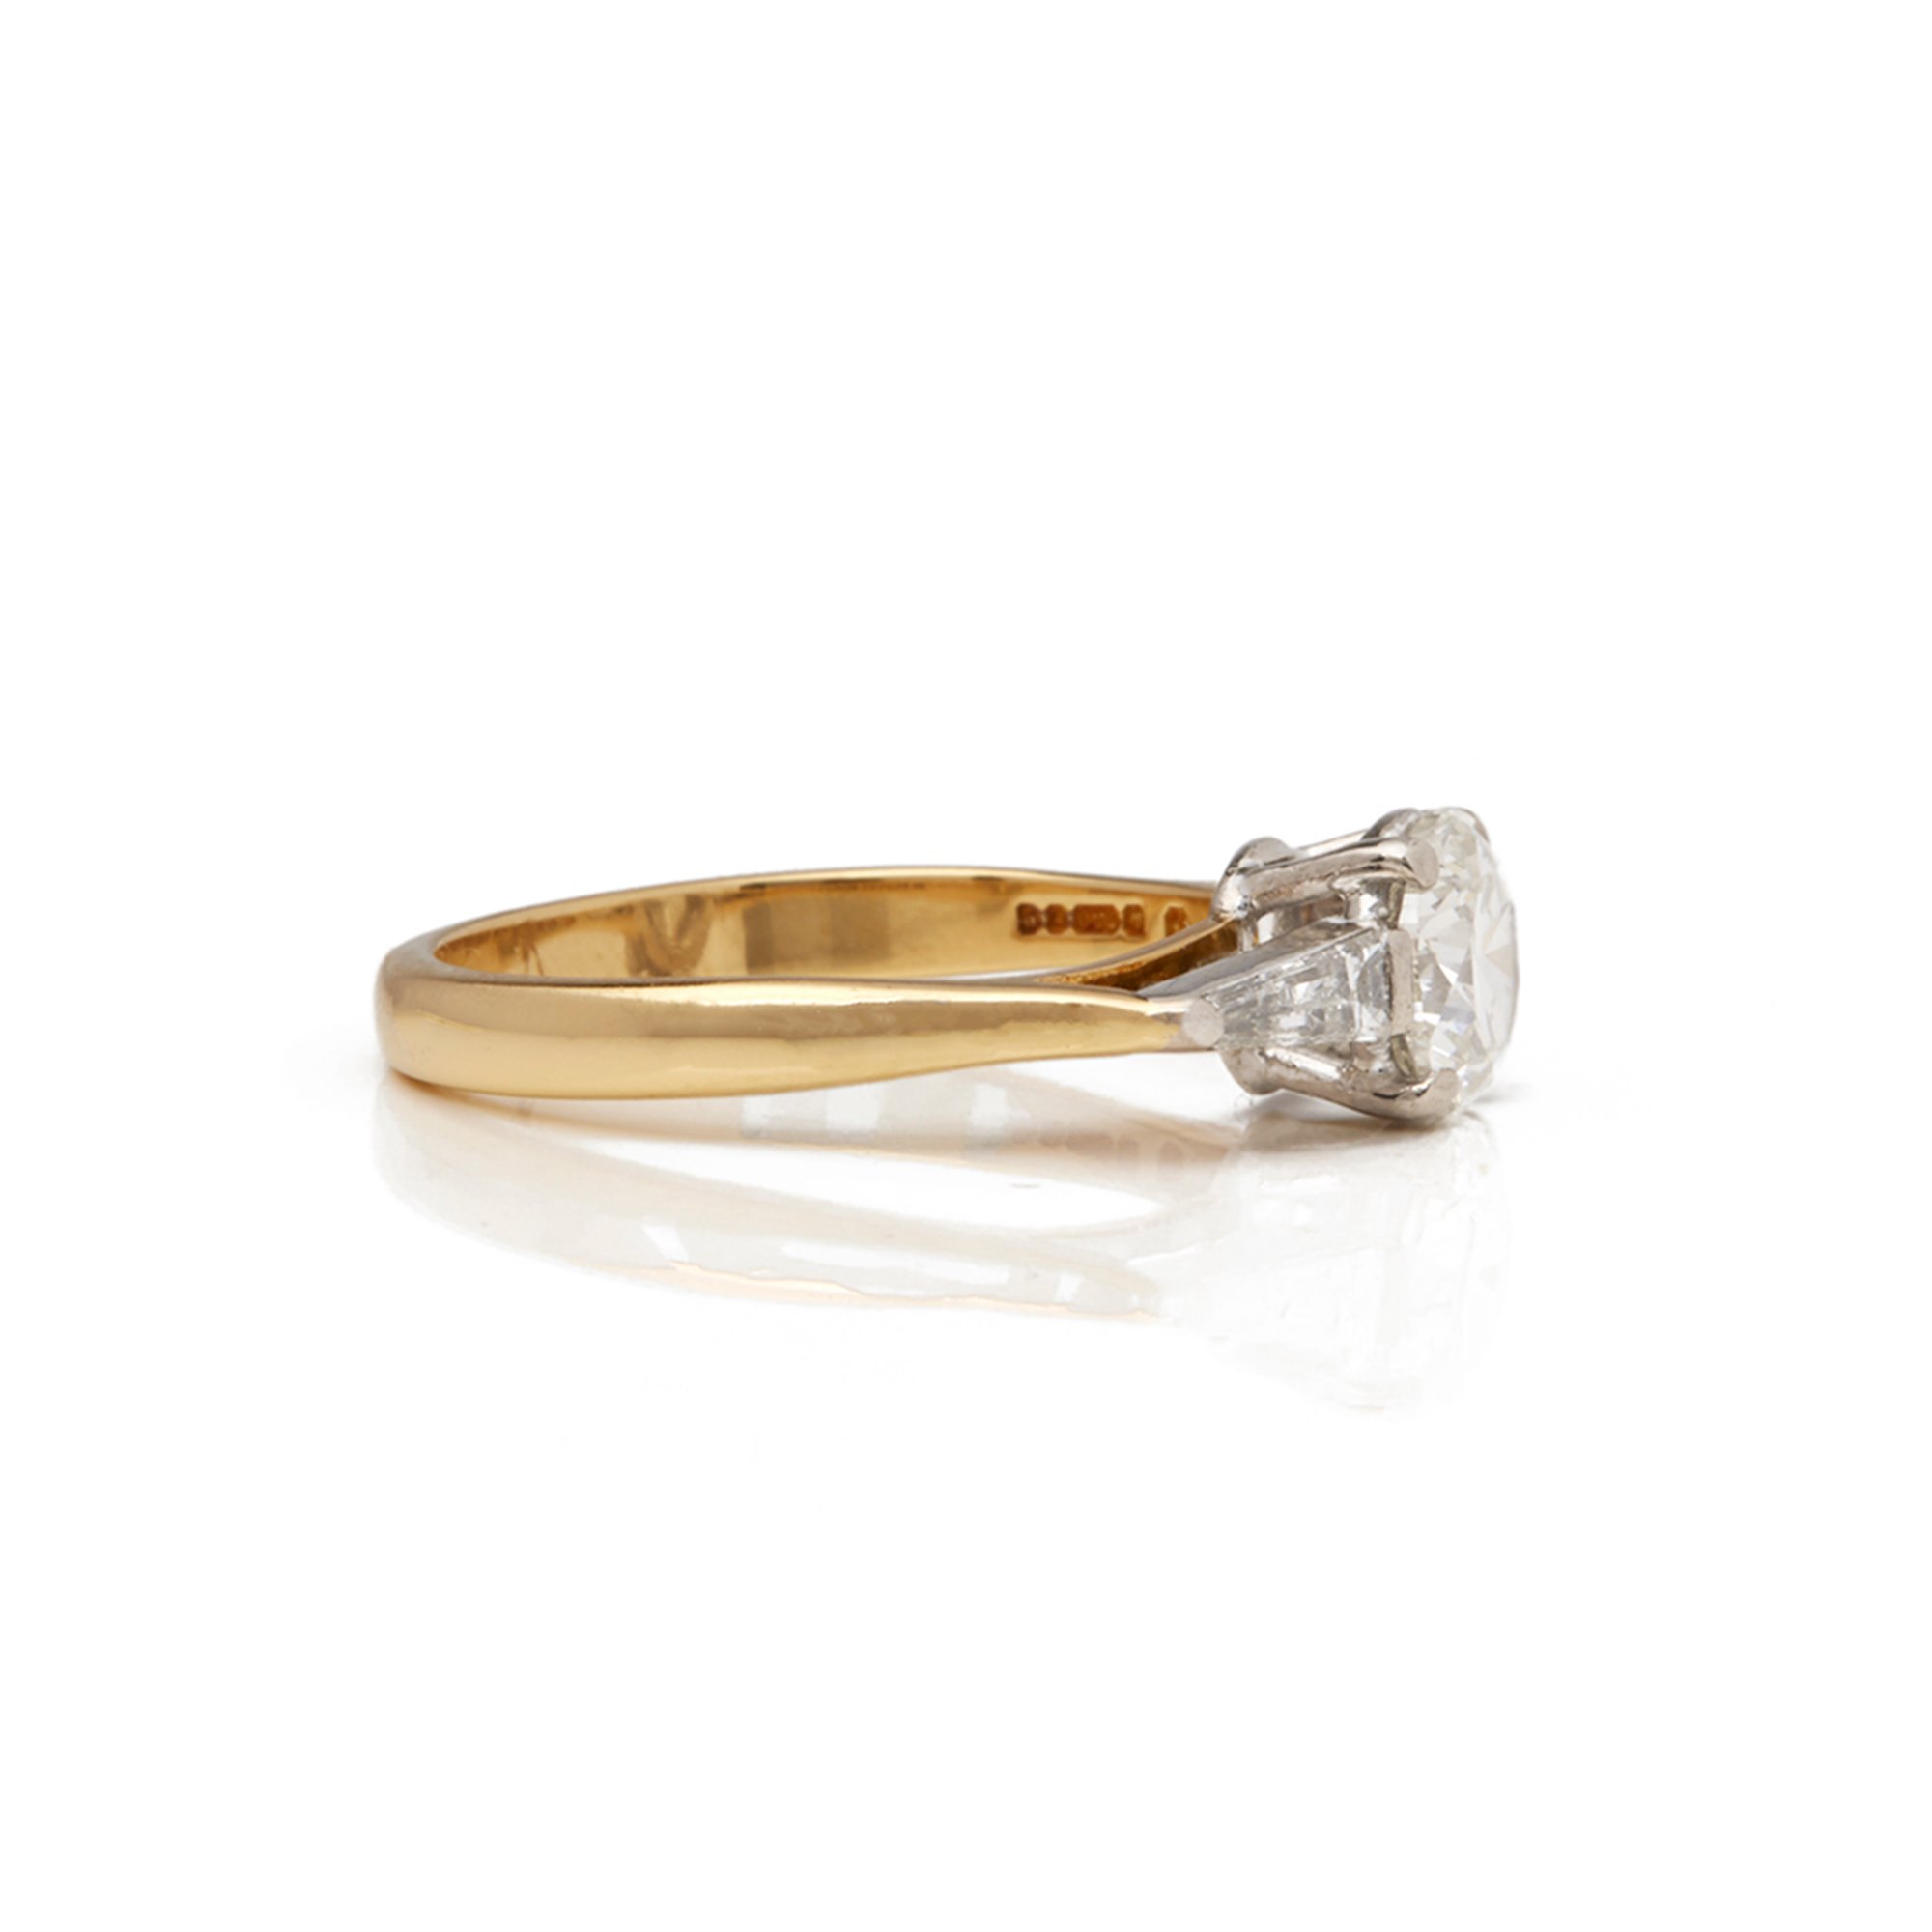 Theo Fennell 18k Yellow Gold Diamond Ring